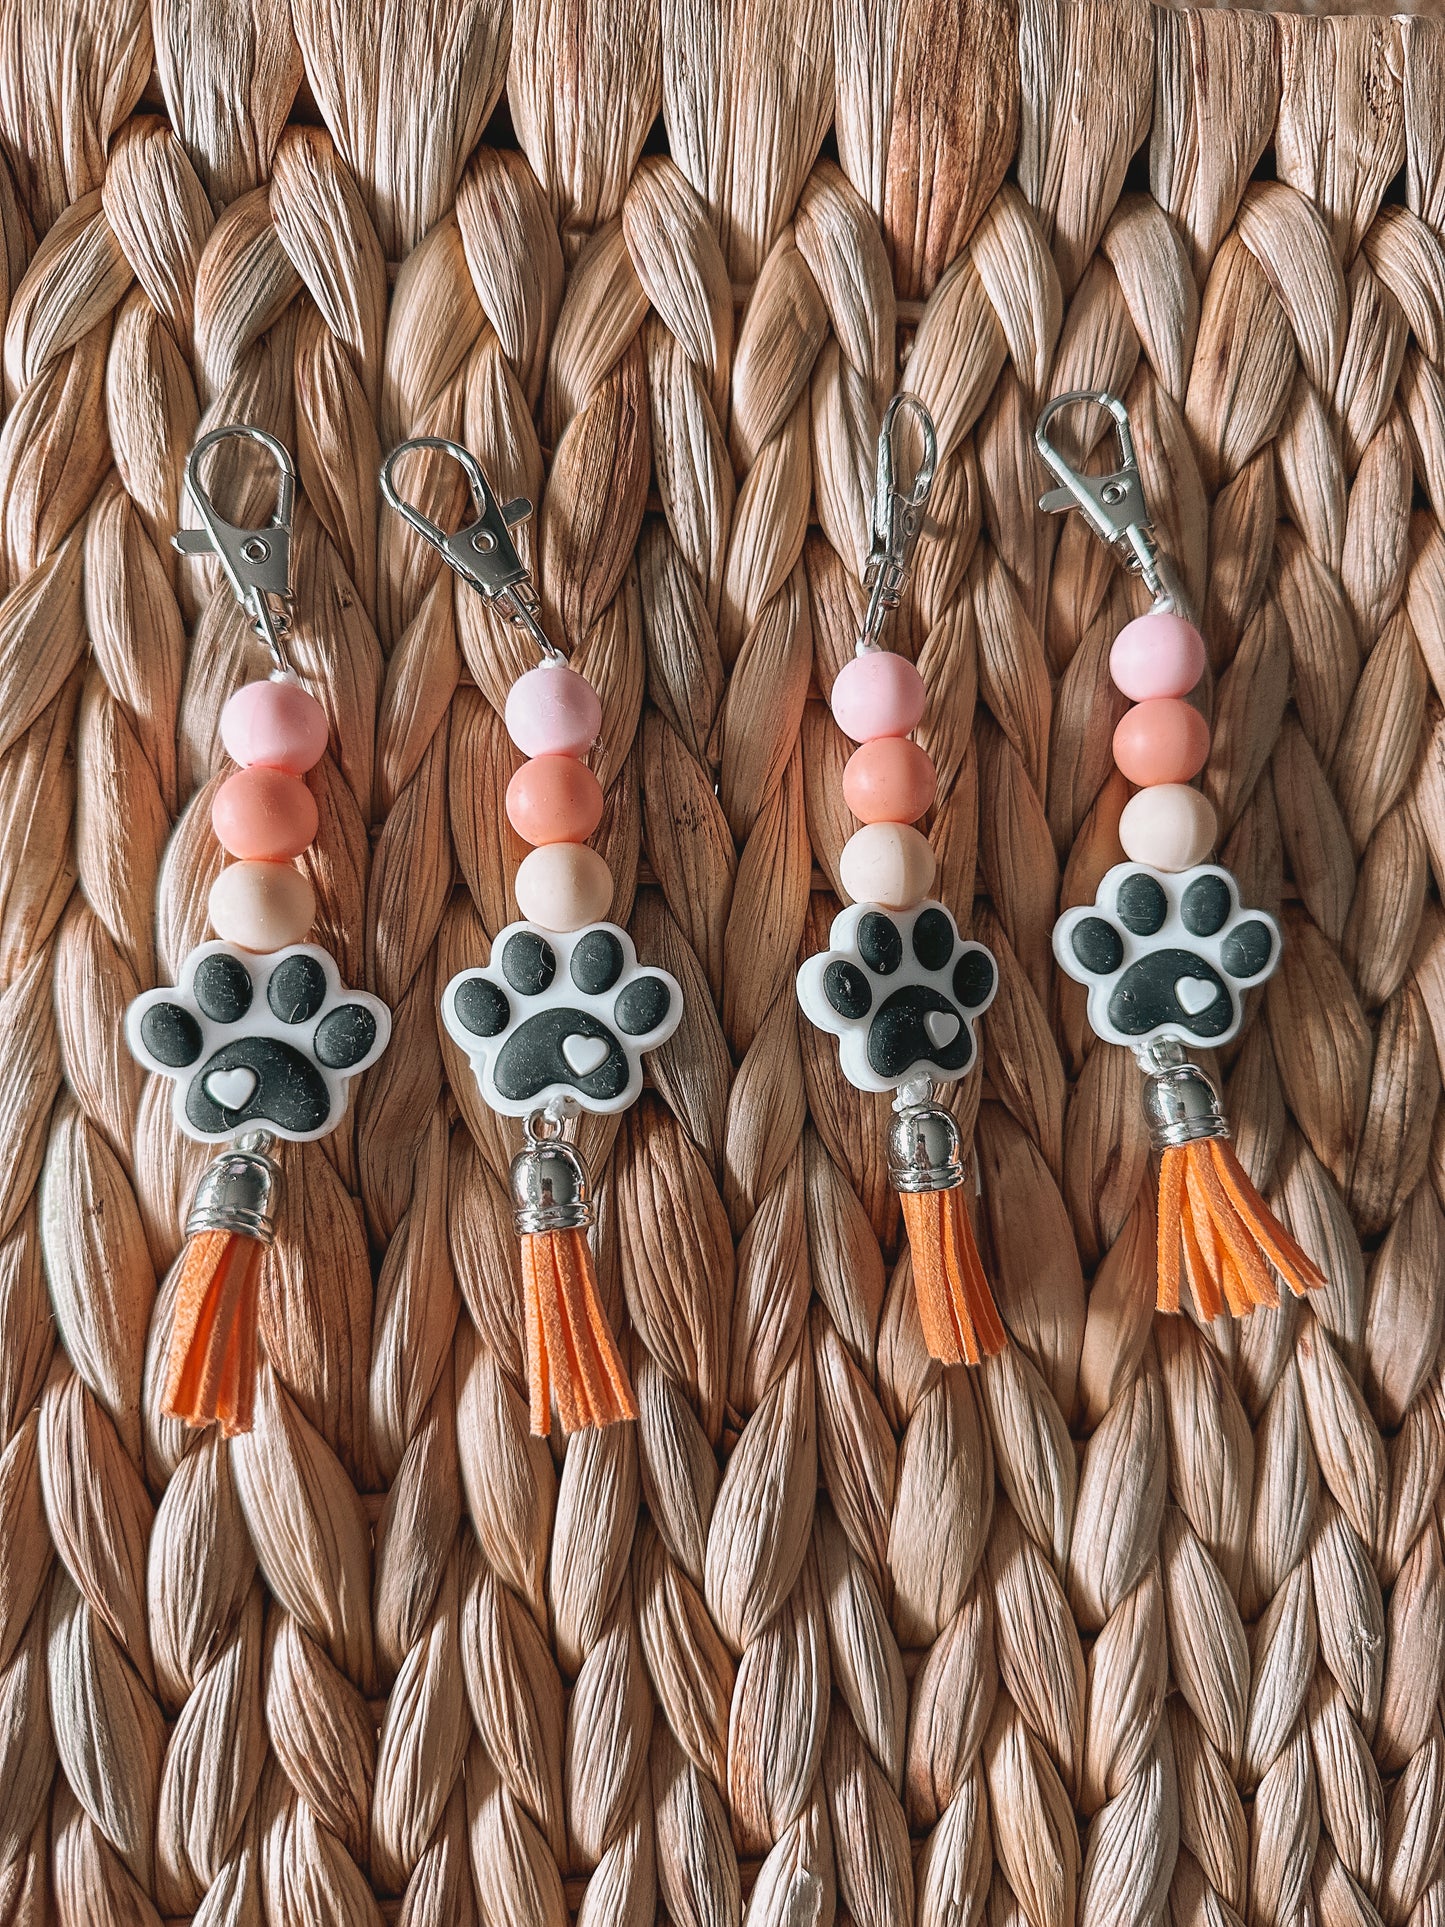 Hart Strings Keychain - Dog Paws